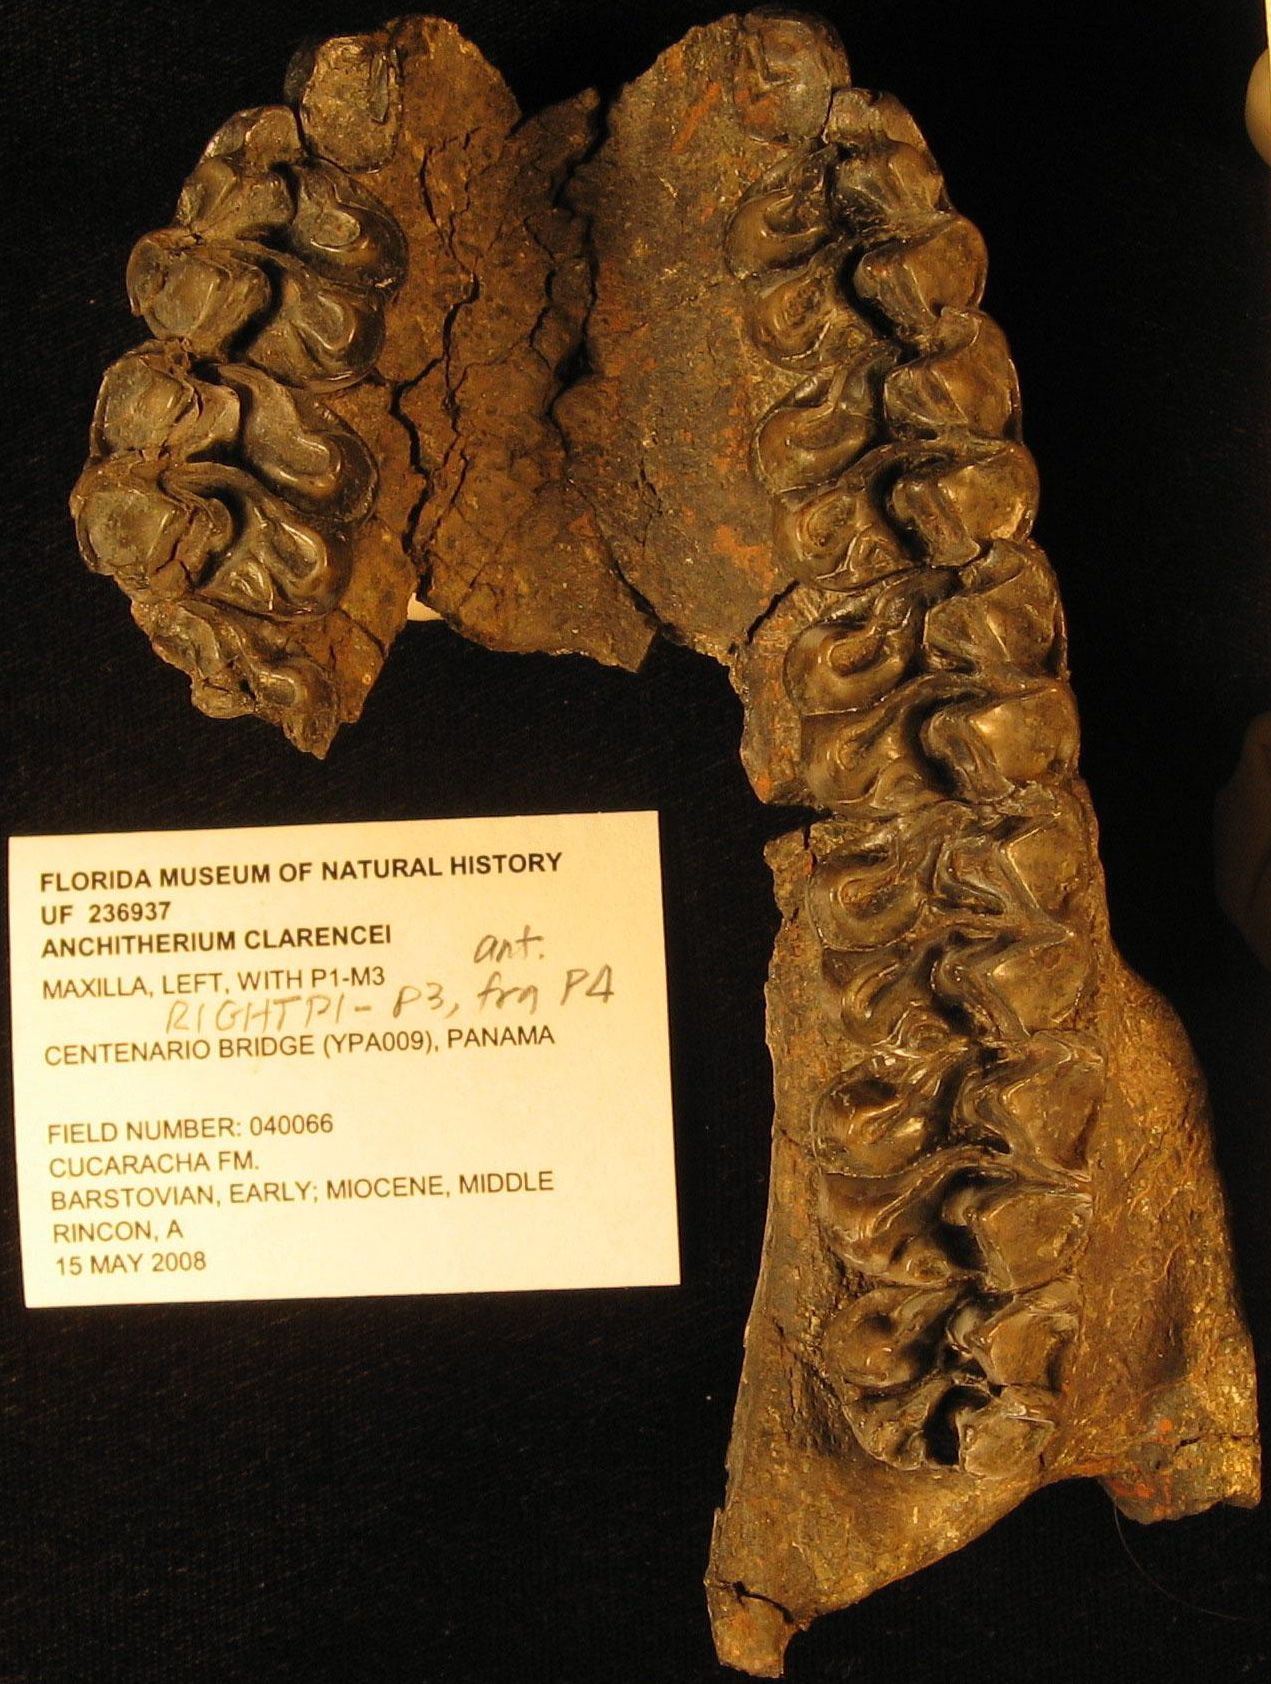 Teeth belonging to the three-toed browsing horse were unearthed in a Panama Canal widening site. Proof that the horse's range expanded from South Dakota to Panama 15-to-18 million years ago. (Courtesy of STRI.)